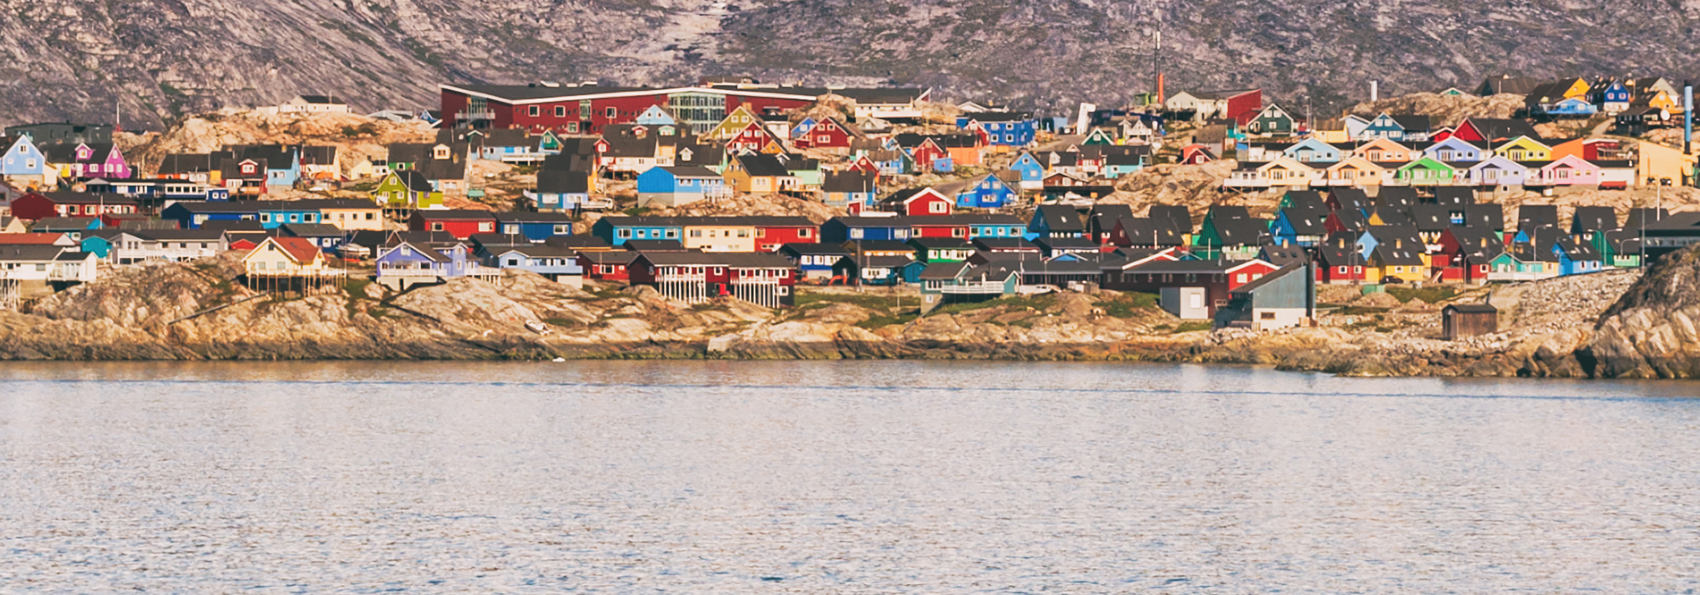 Ilulissat_by_sommer_02